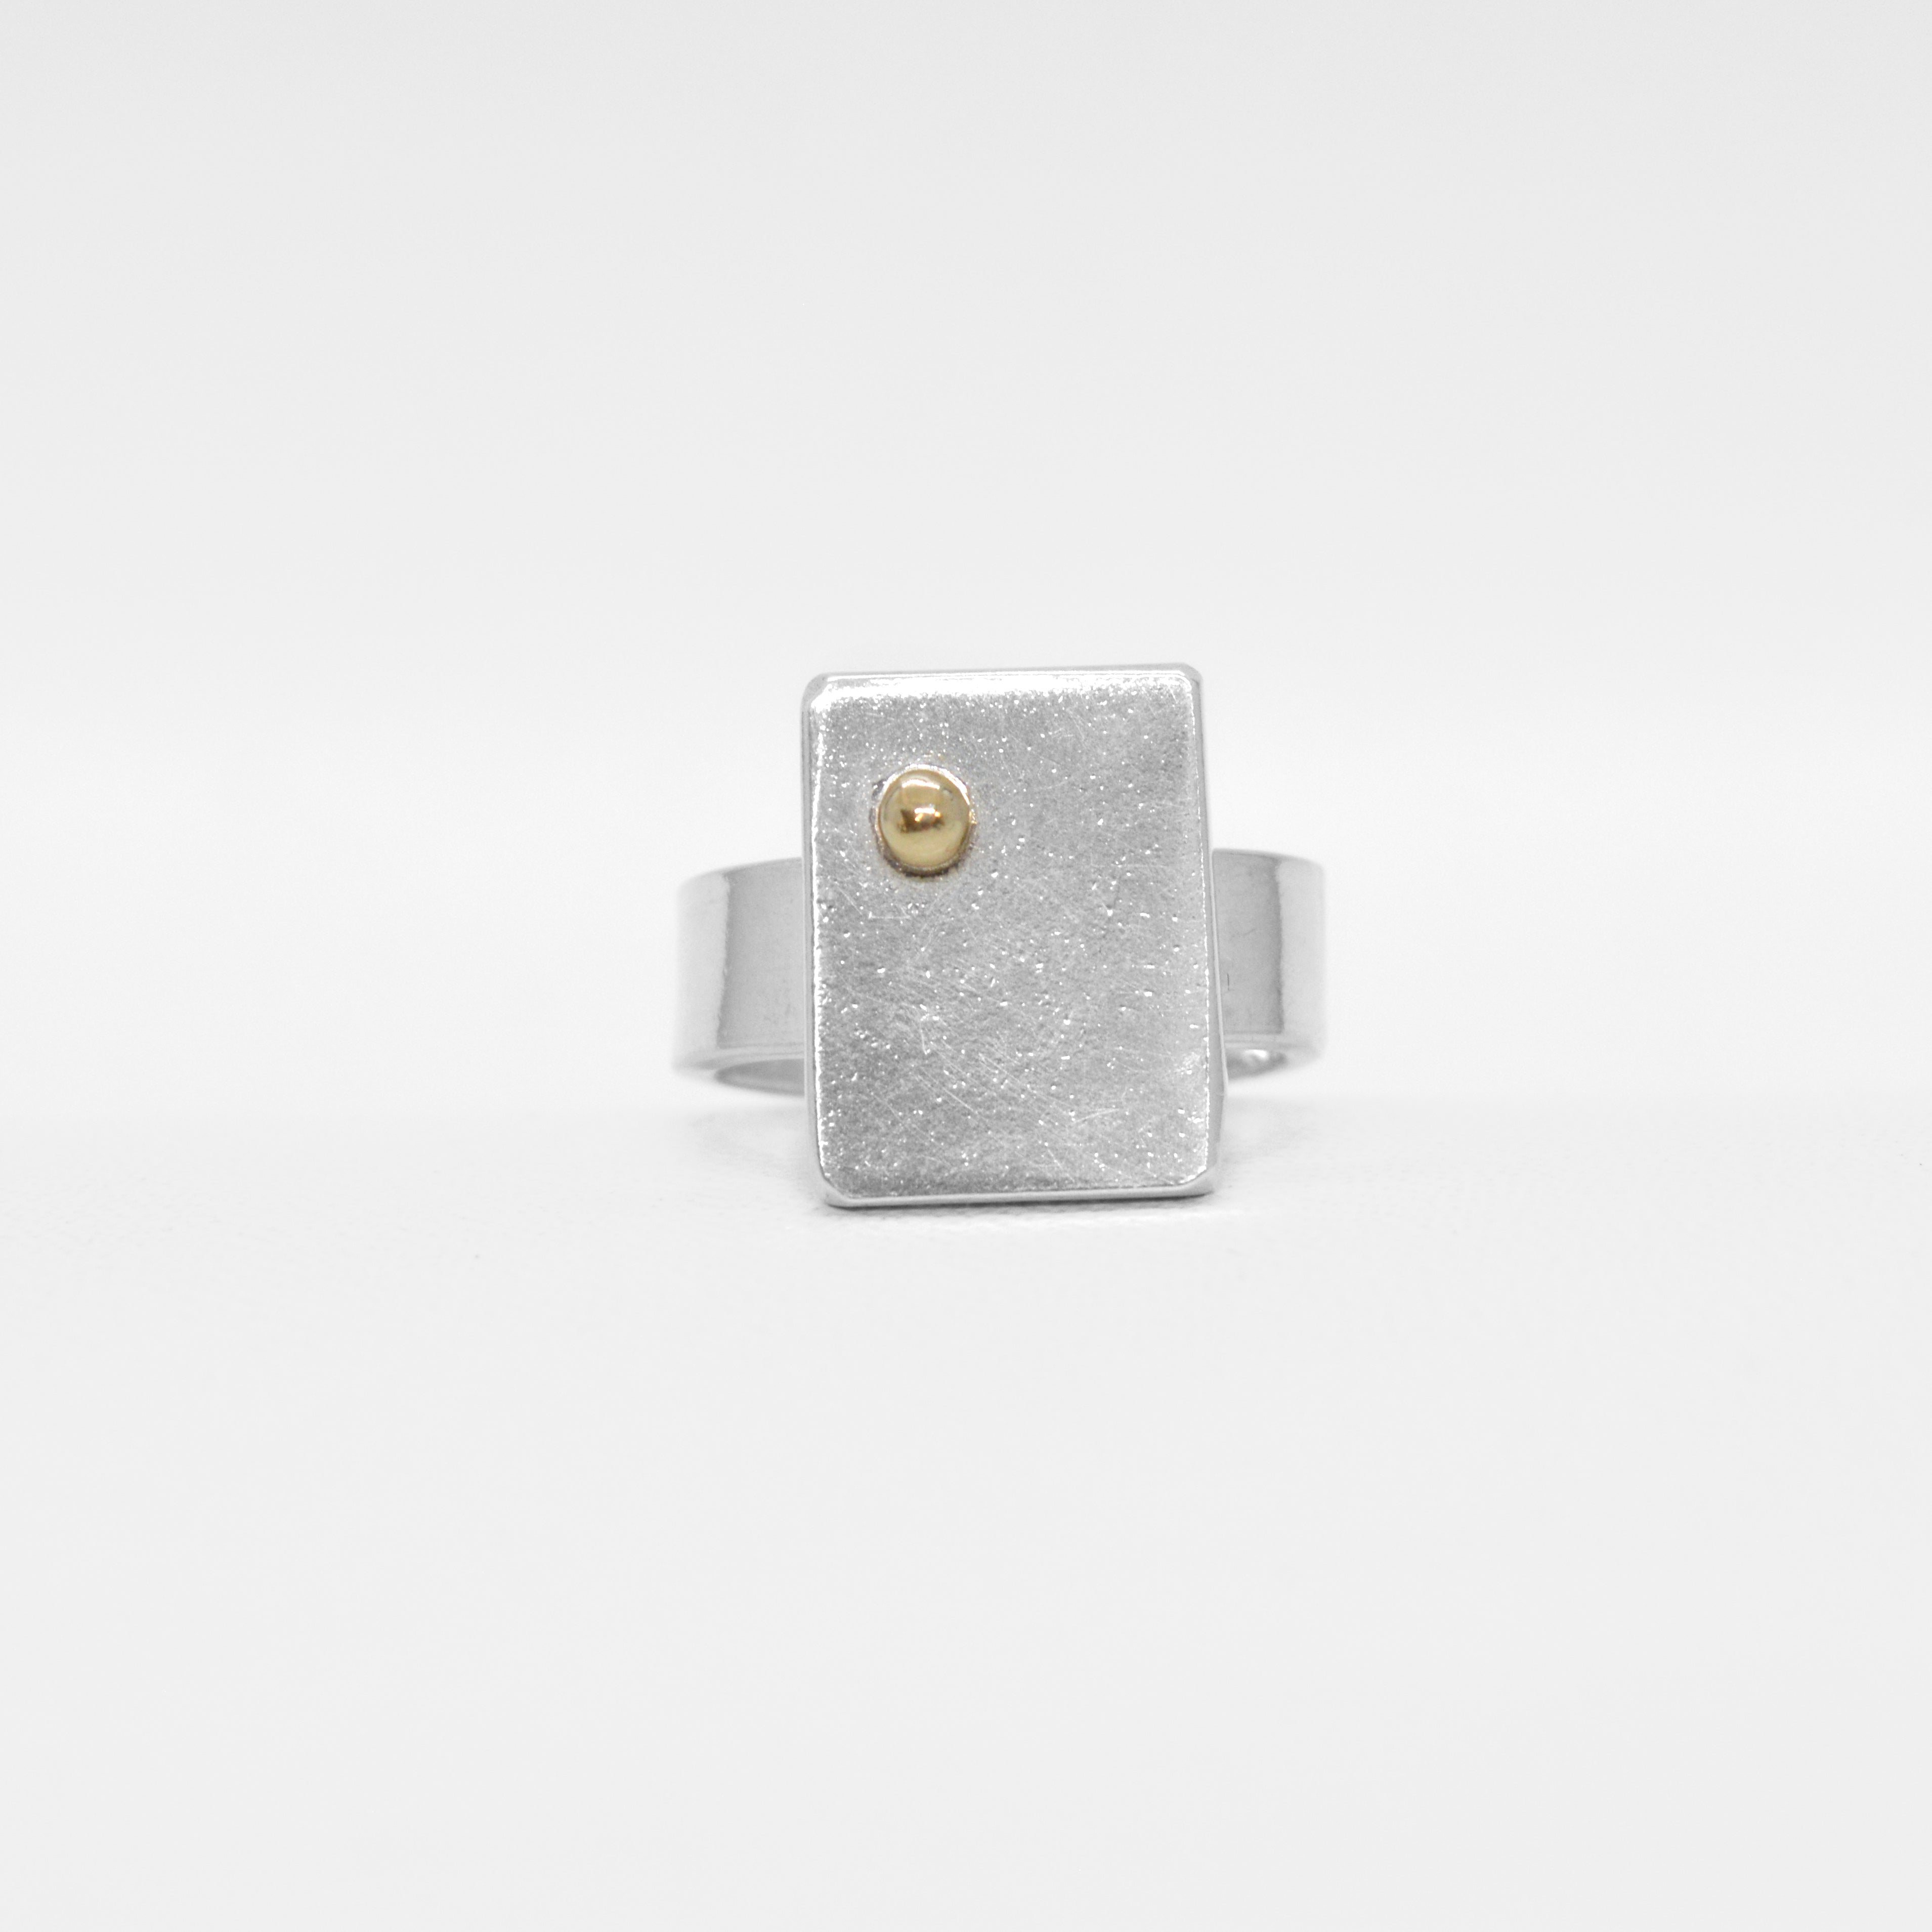 Silver Signet Ring with 14K gold ball